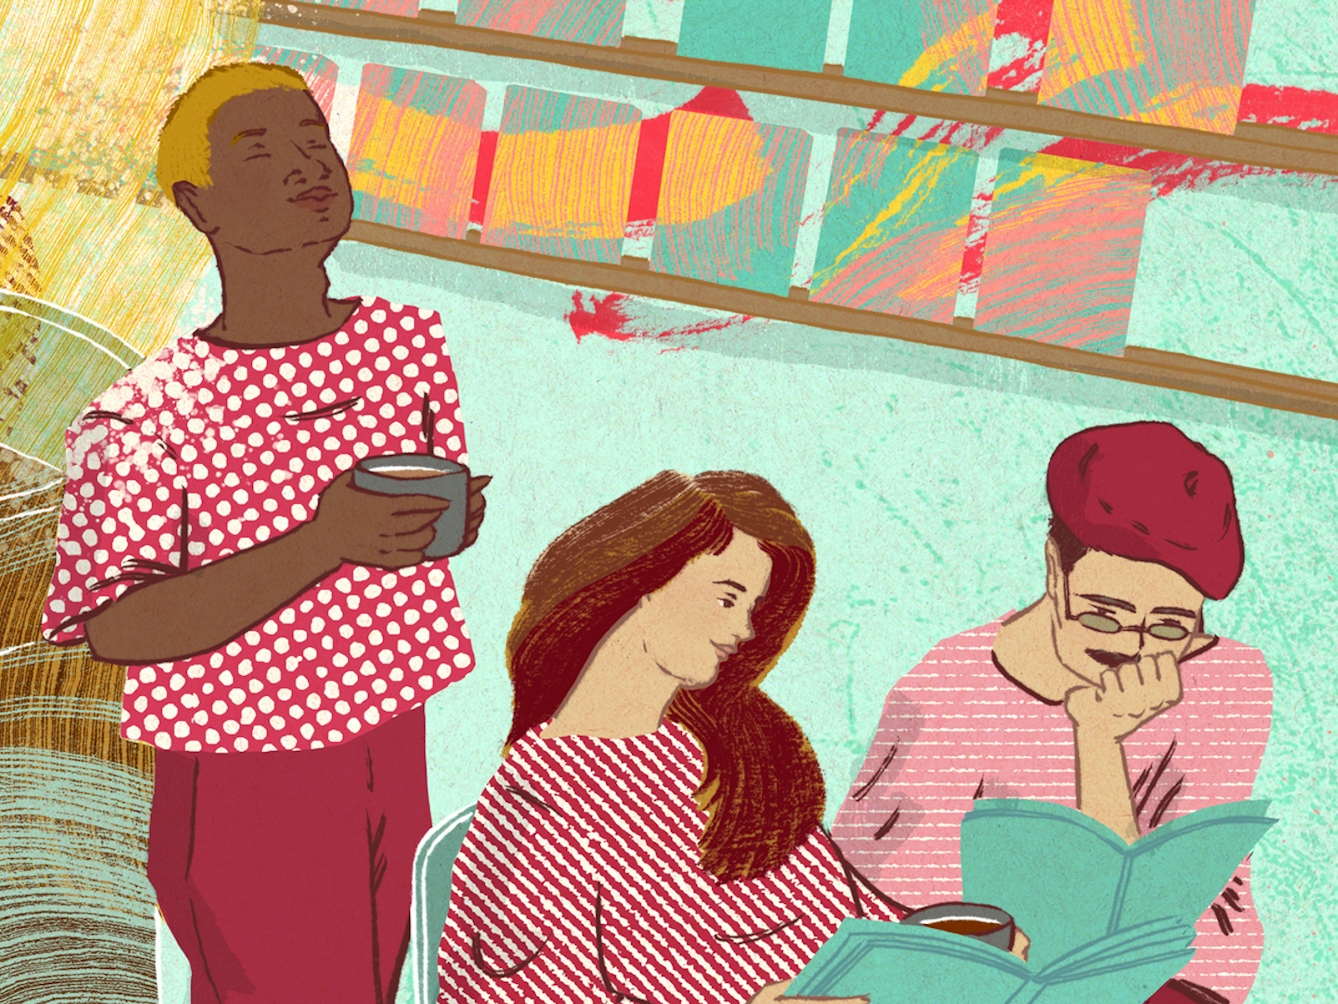 A digital illustration of people in a café. One person is relaxing by themselves while two others are in conversation while holding books. One of them has long dark hair while the other is wearing a red beret, round glasses and has a moustache. Behind are are shelves of colourful books and artworks.